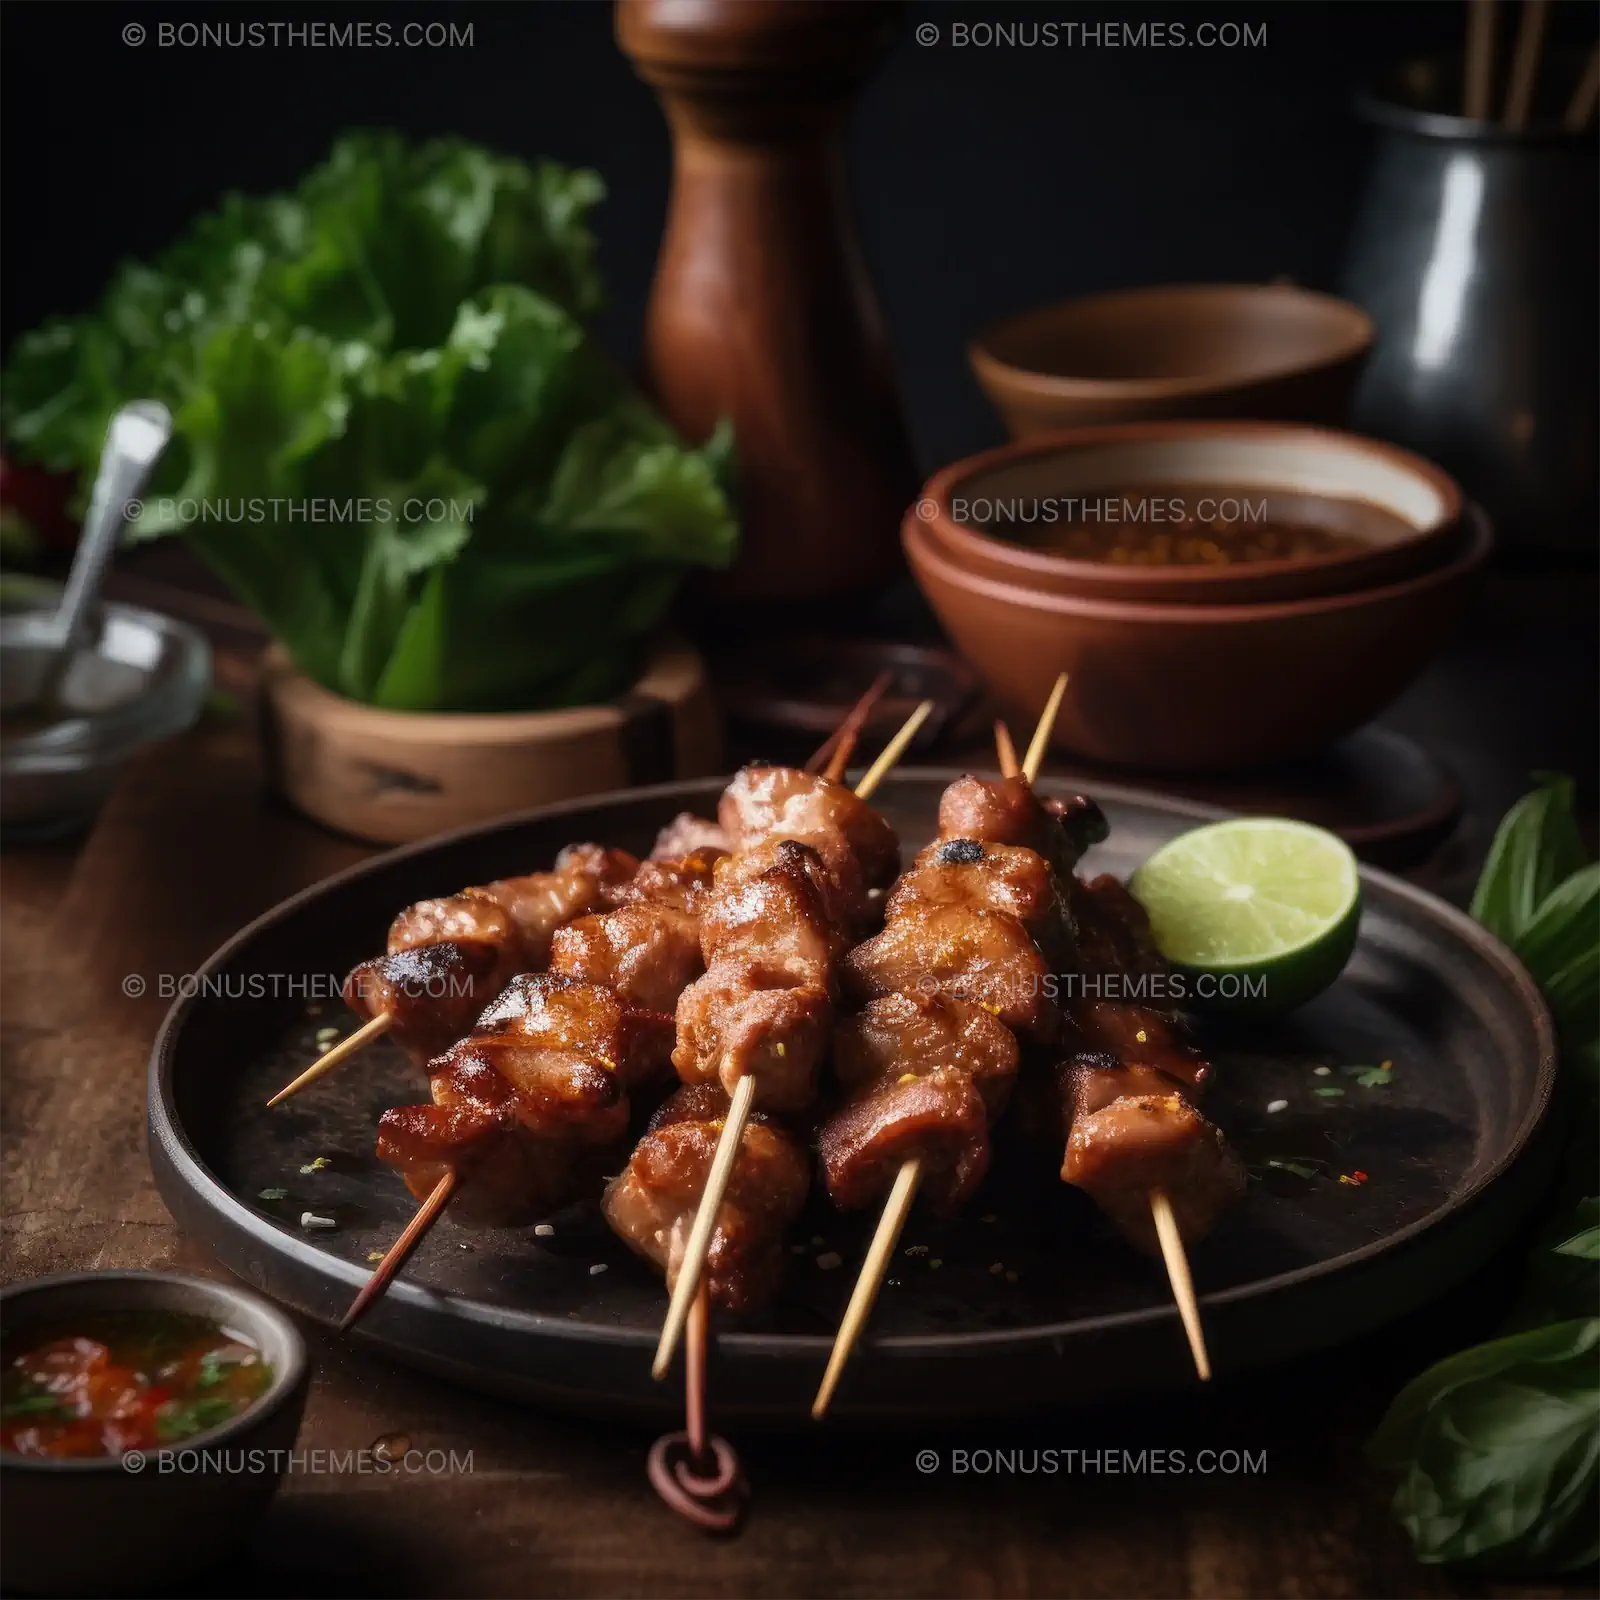 Grilled meat skewers in a plate